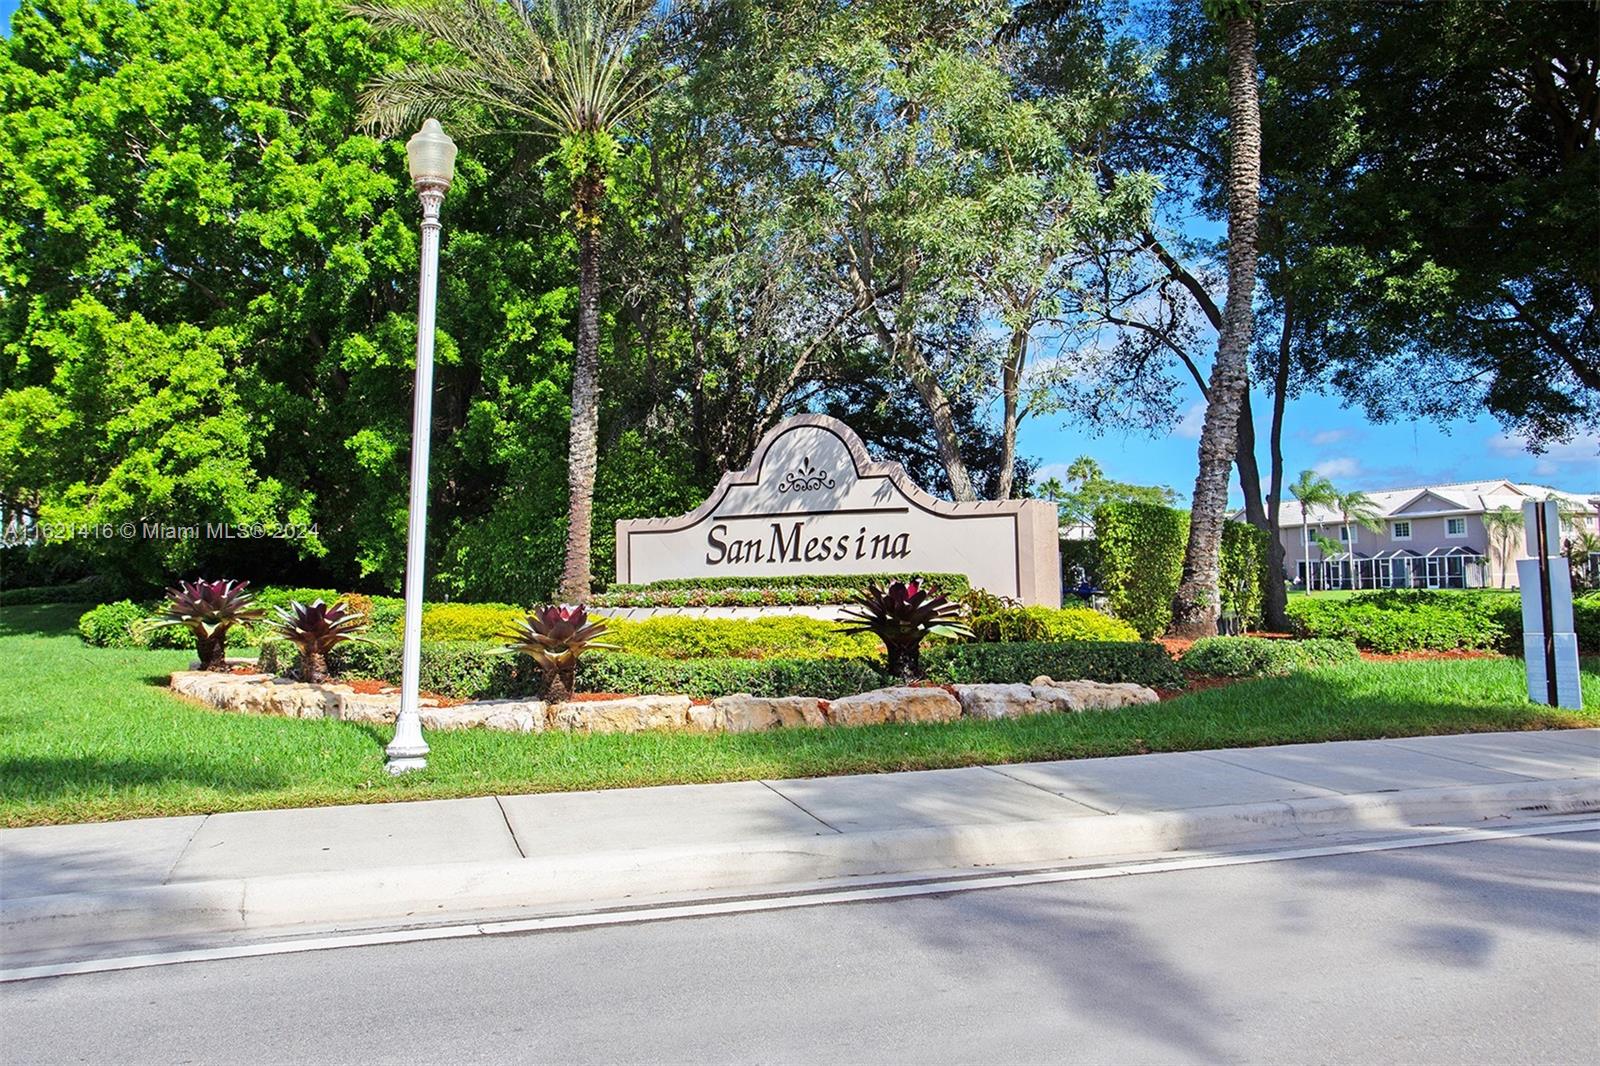 You will be delighted with this immaculate 2bed 2.5bath 1 car garage Townhouse in  San Messina in Weston. Freshly painted and light and aery. Accordion shutters throughout. Each bedroom is an en-suite. Brand new SS Appliances, Granite countertops, Upgraded cabinets. All bathrooms have been tastefully upgraded. Tiled throughout. Master bedroom walk-in closet features closet organizer. Sliding glass doors lead to an enclosed patio with relaxing garden views. Enjoy the resort style pool, volleyball courts and kids playground. "A" rated schools. Supermarket, restaurants, and Mall just minutes away. Easy access to Highway and Sawgrass Expressway. Tenants Lease expires 14 Feb 25